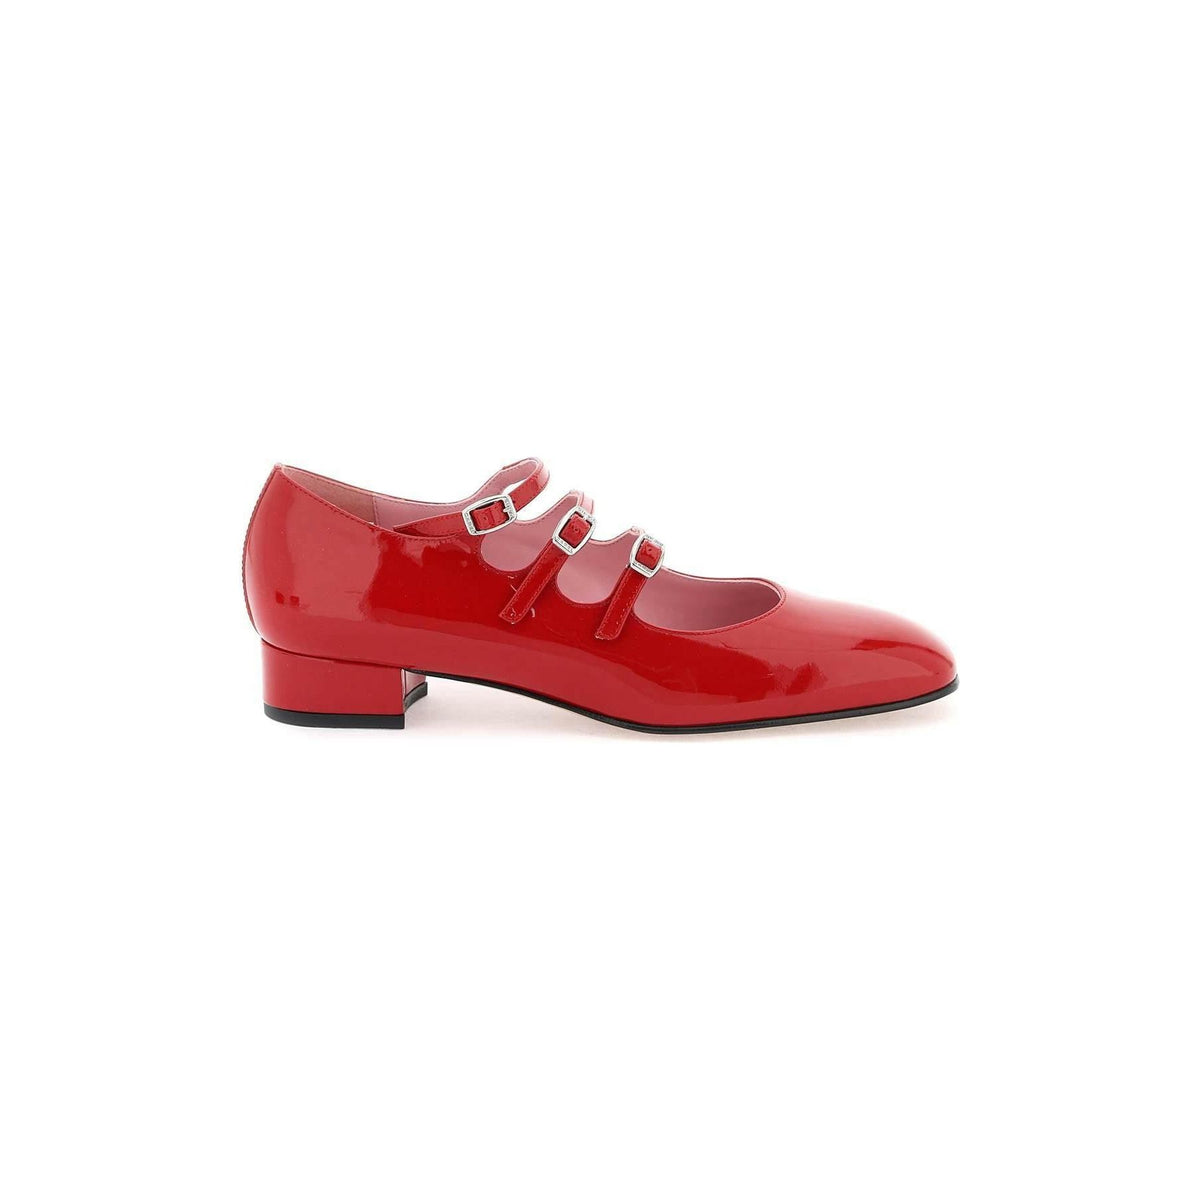 CAREL - Red Ariana Patent Leather Mary Jane Pumps - JOHN JULIA